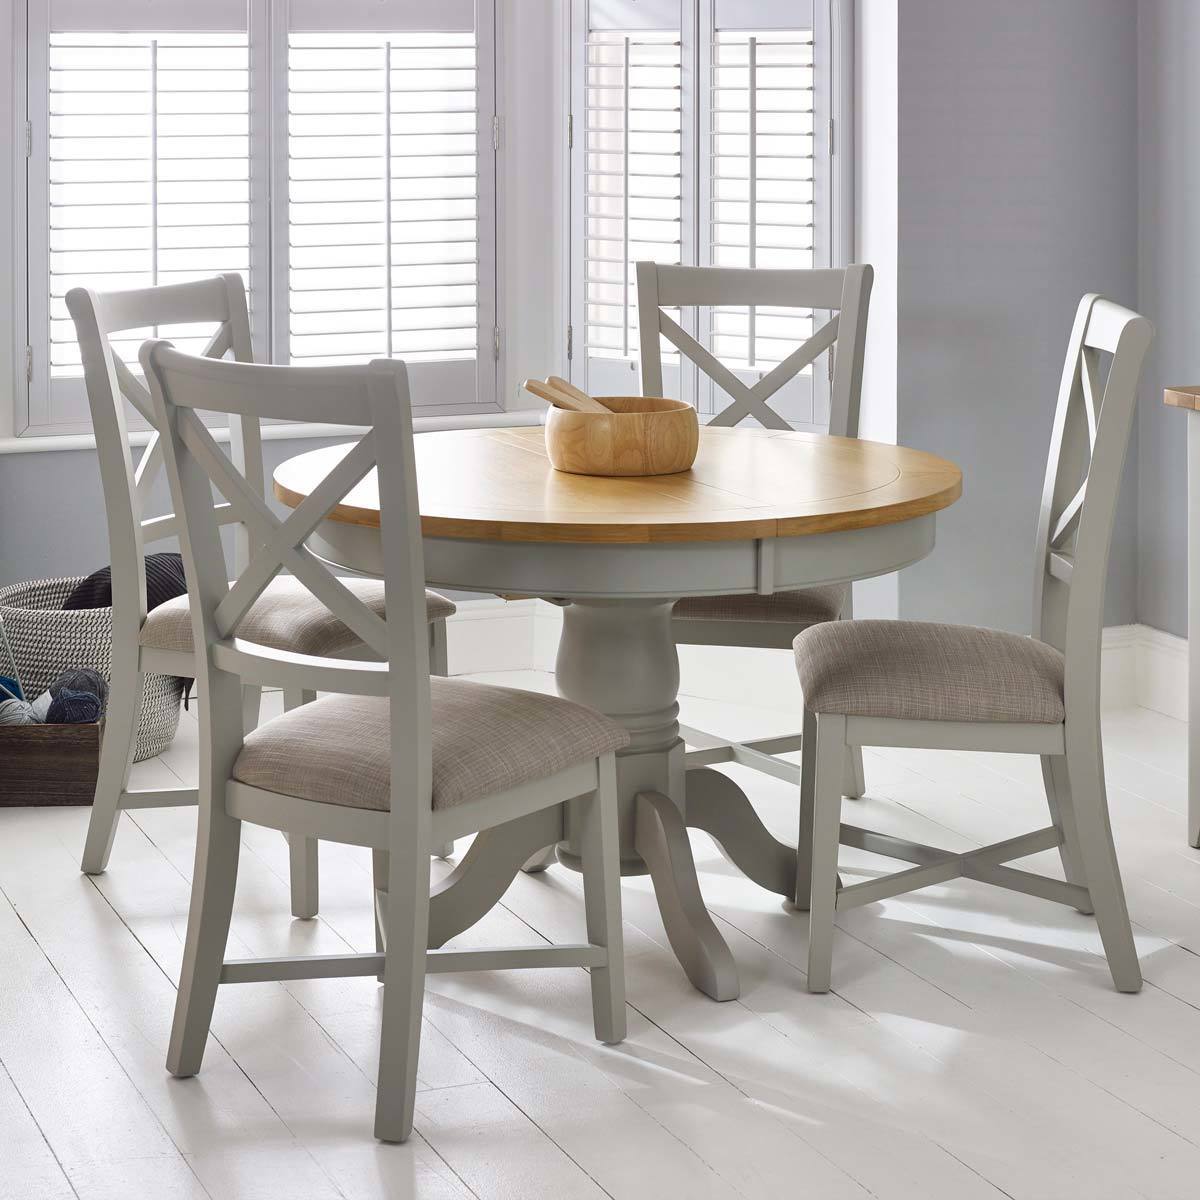 Round Dining Table 4 Chairs : Round Dining Table 4 White Chairs